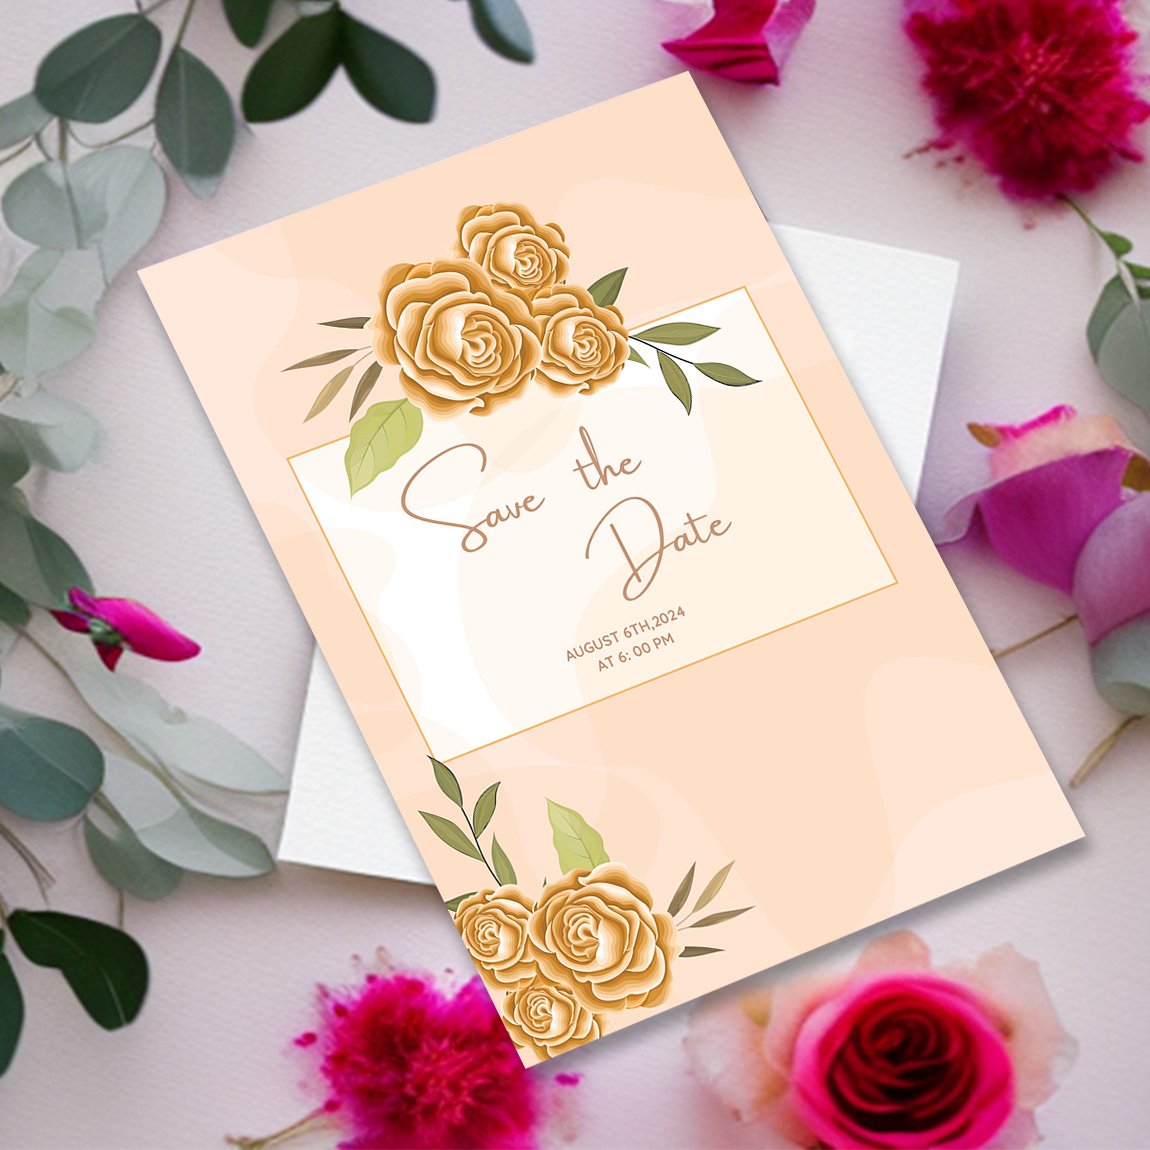 Image with enchanting wedding invitation card with gold color roses.